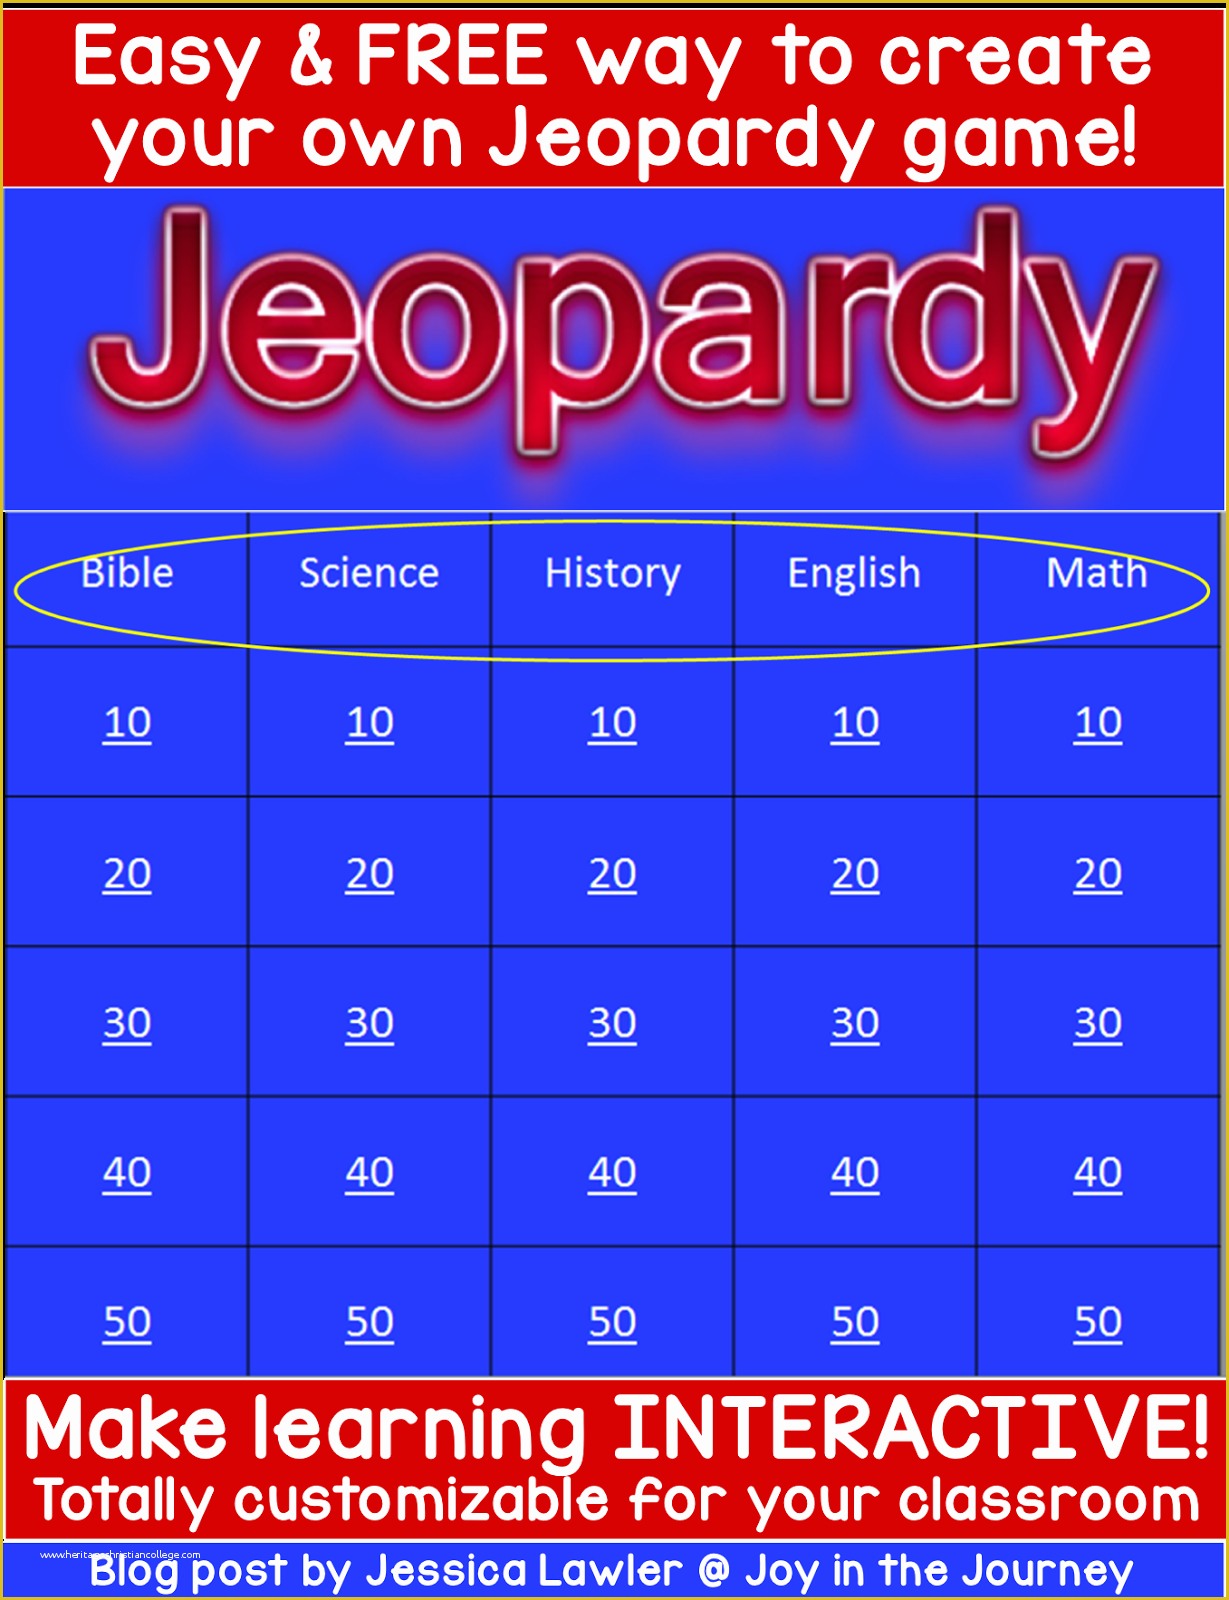 Free Jeopardy Template Of Free Easy Create Your Own Jeopardy Game Joy In the Journey